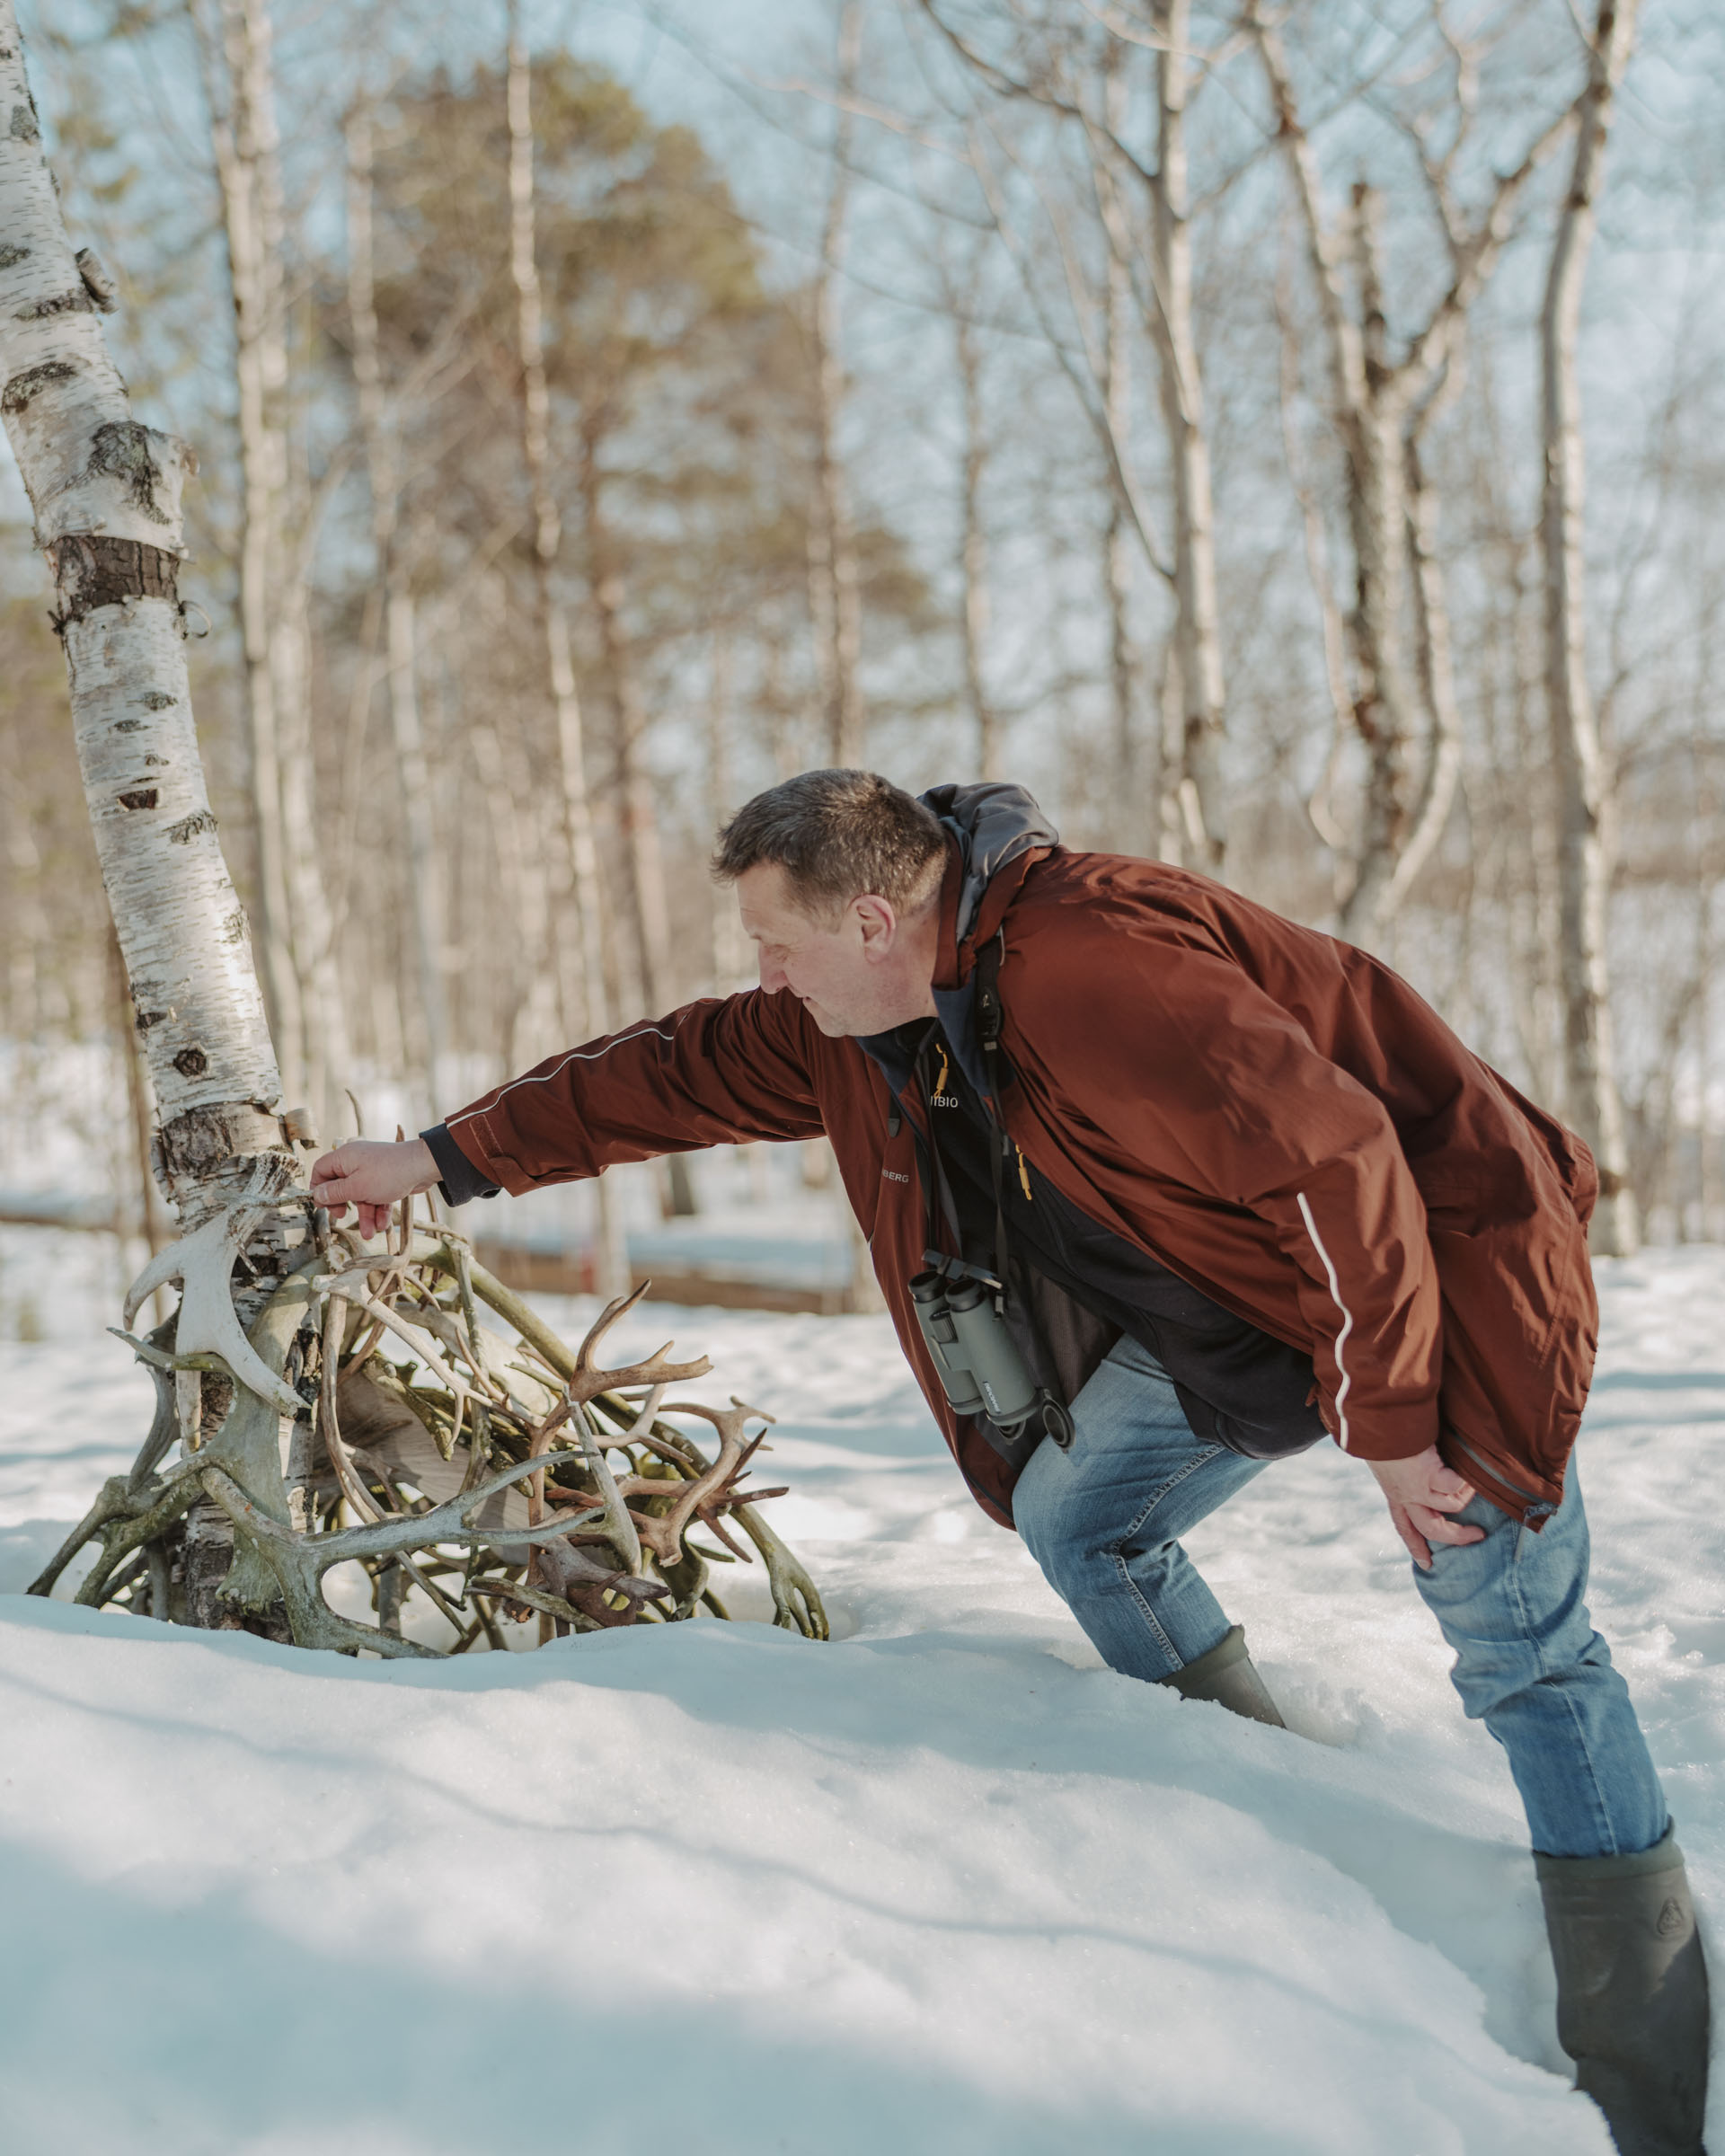 Paul Aspholm places reindeer antlers collected from carcasses in the field onto a pile at his home in Svanhovd. 